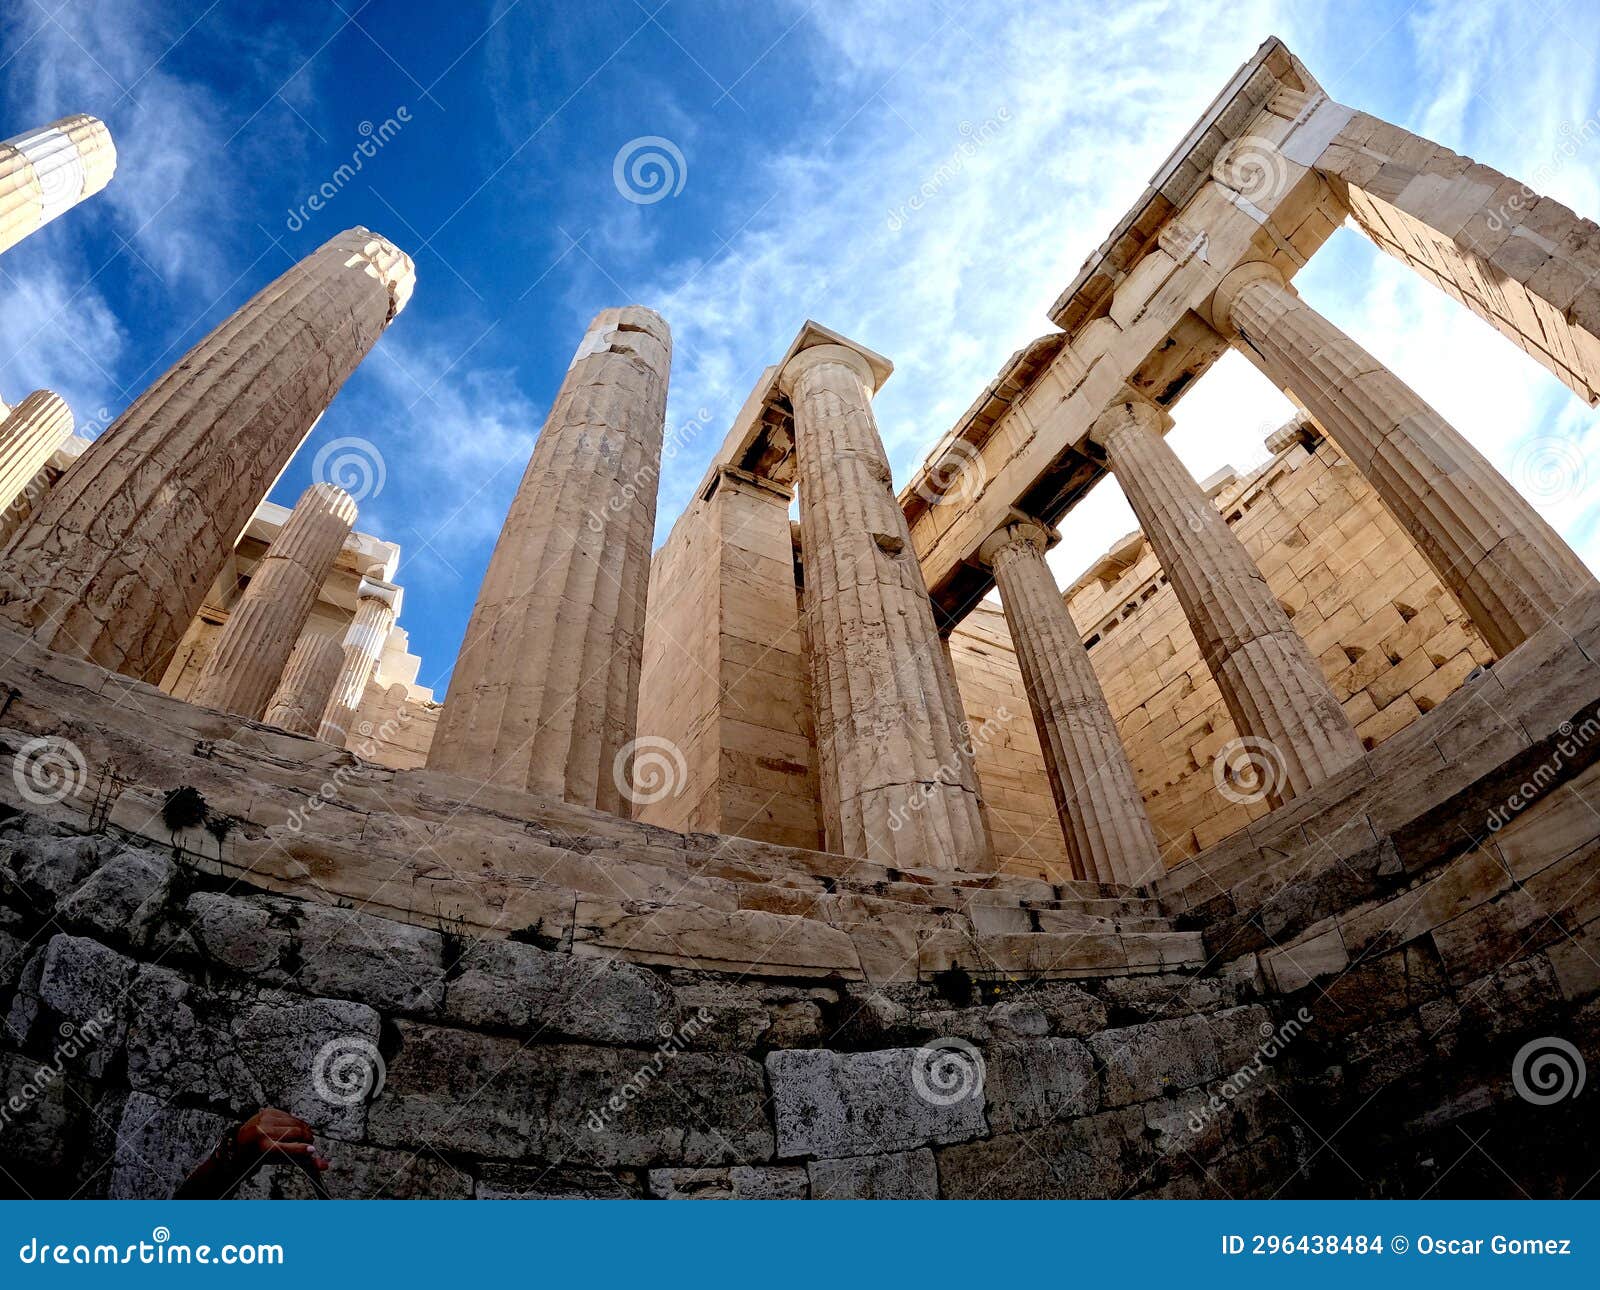 archeologist greek colums inside acropolis in athens